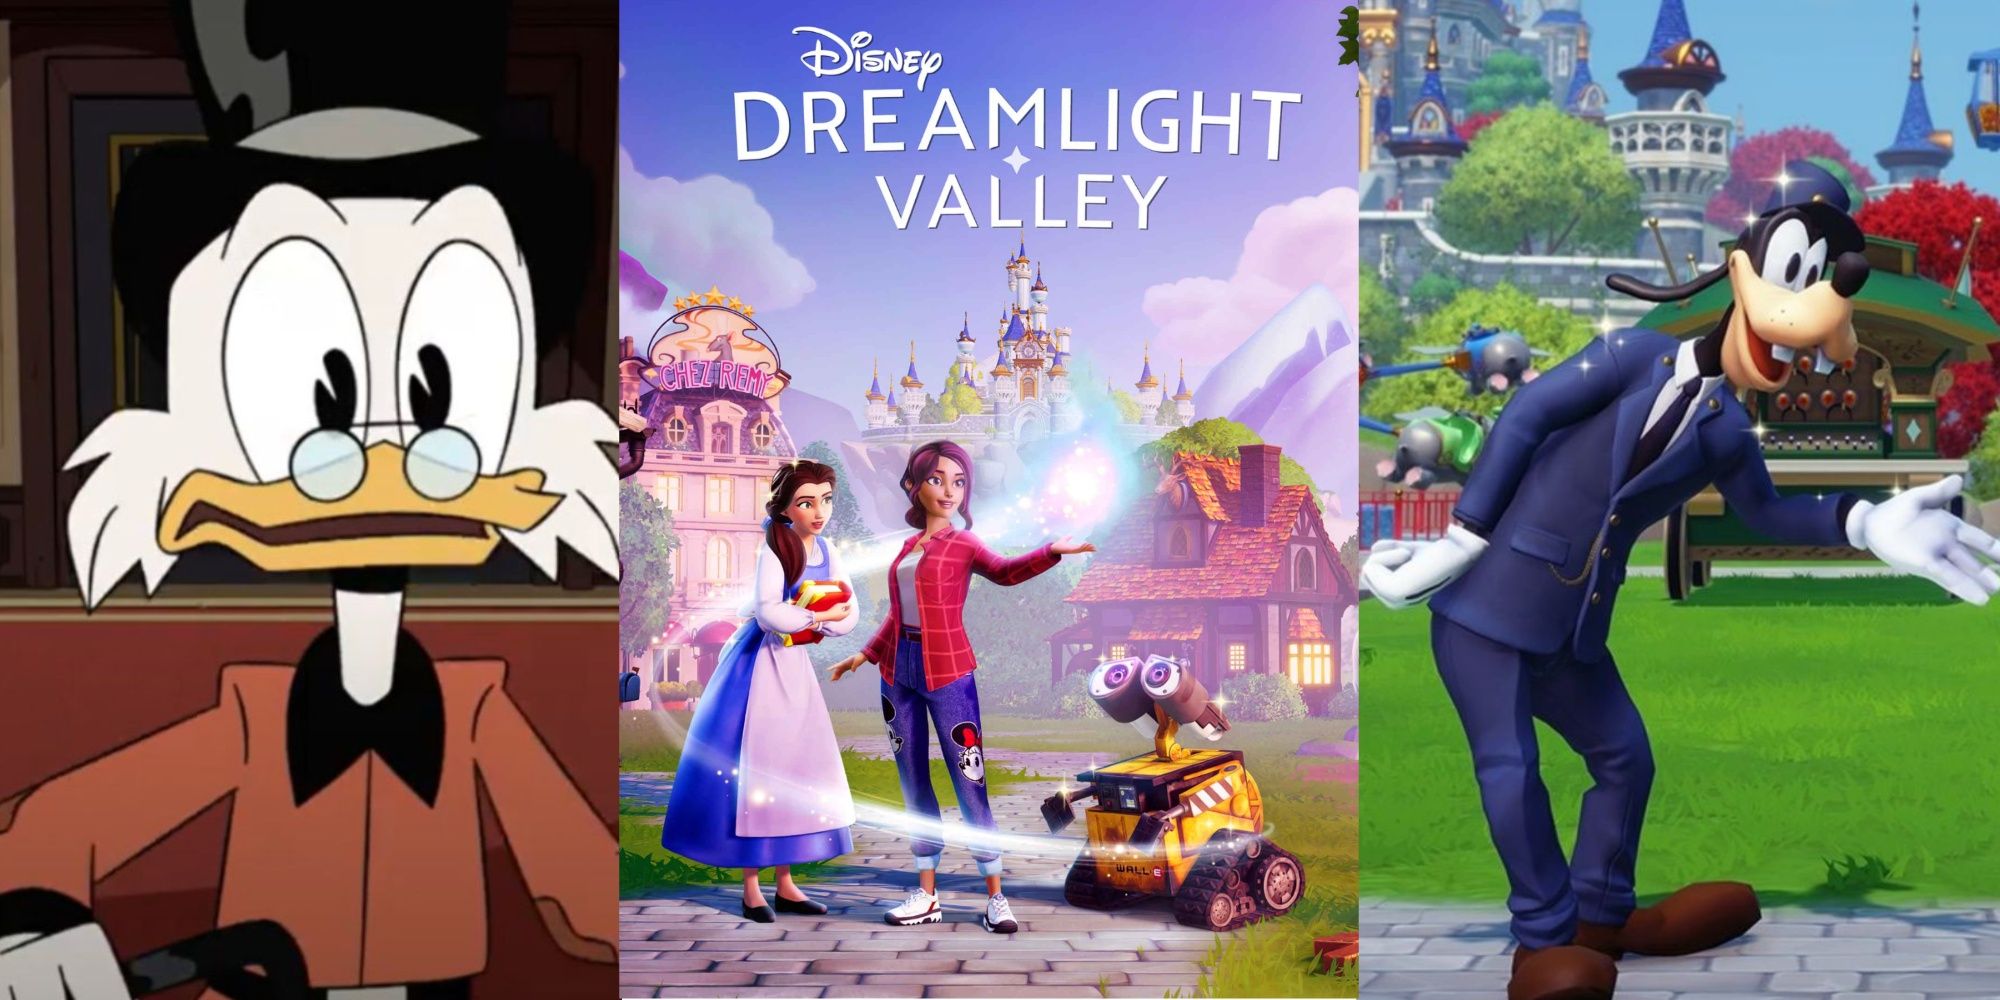 Split image of Scrooge mcduck, the Dreamlight valley title screen and goofy in a conductor uniform